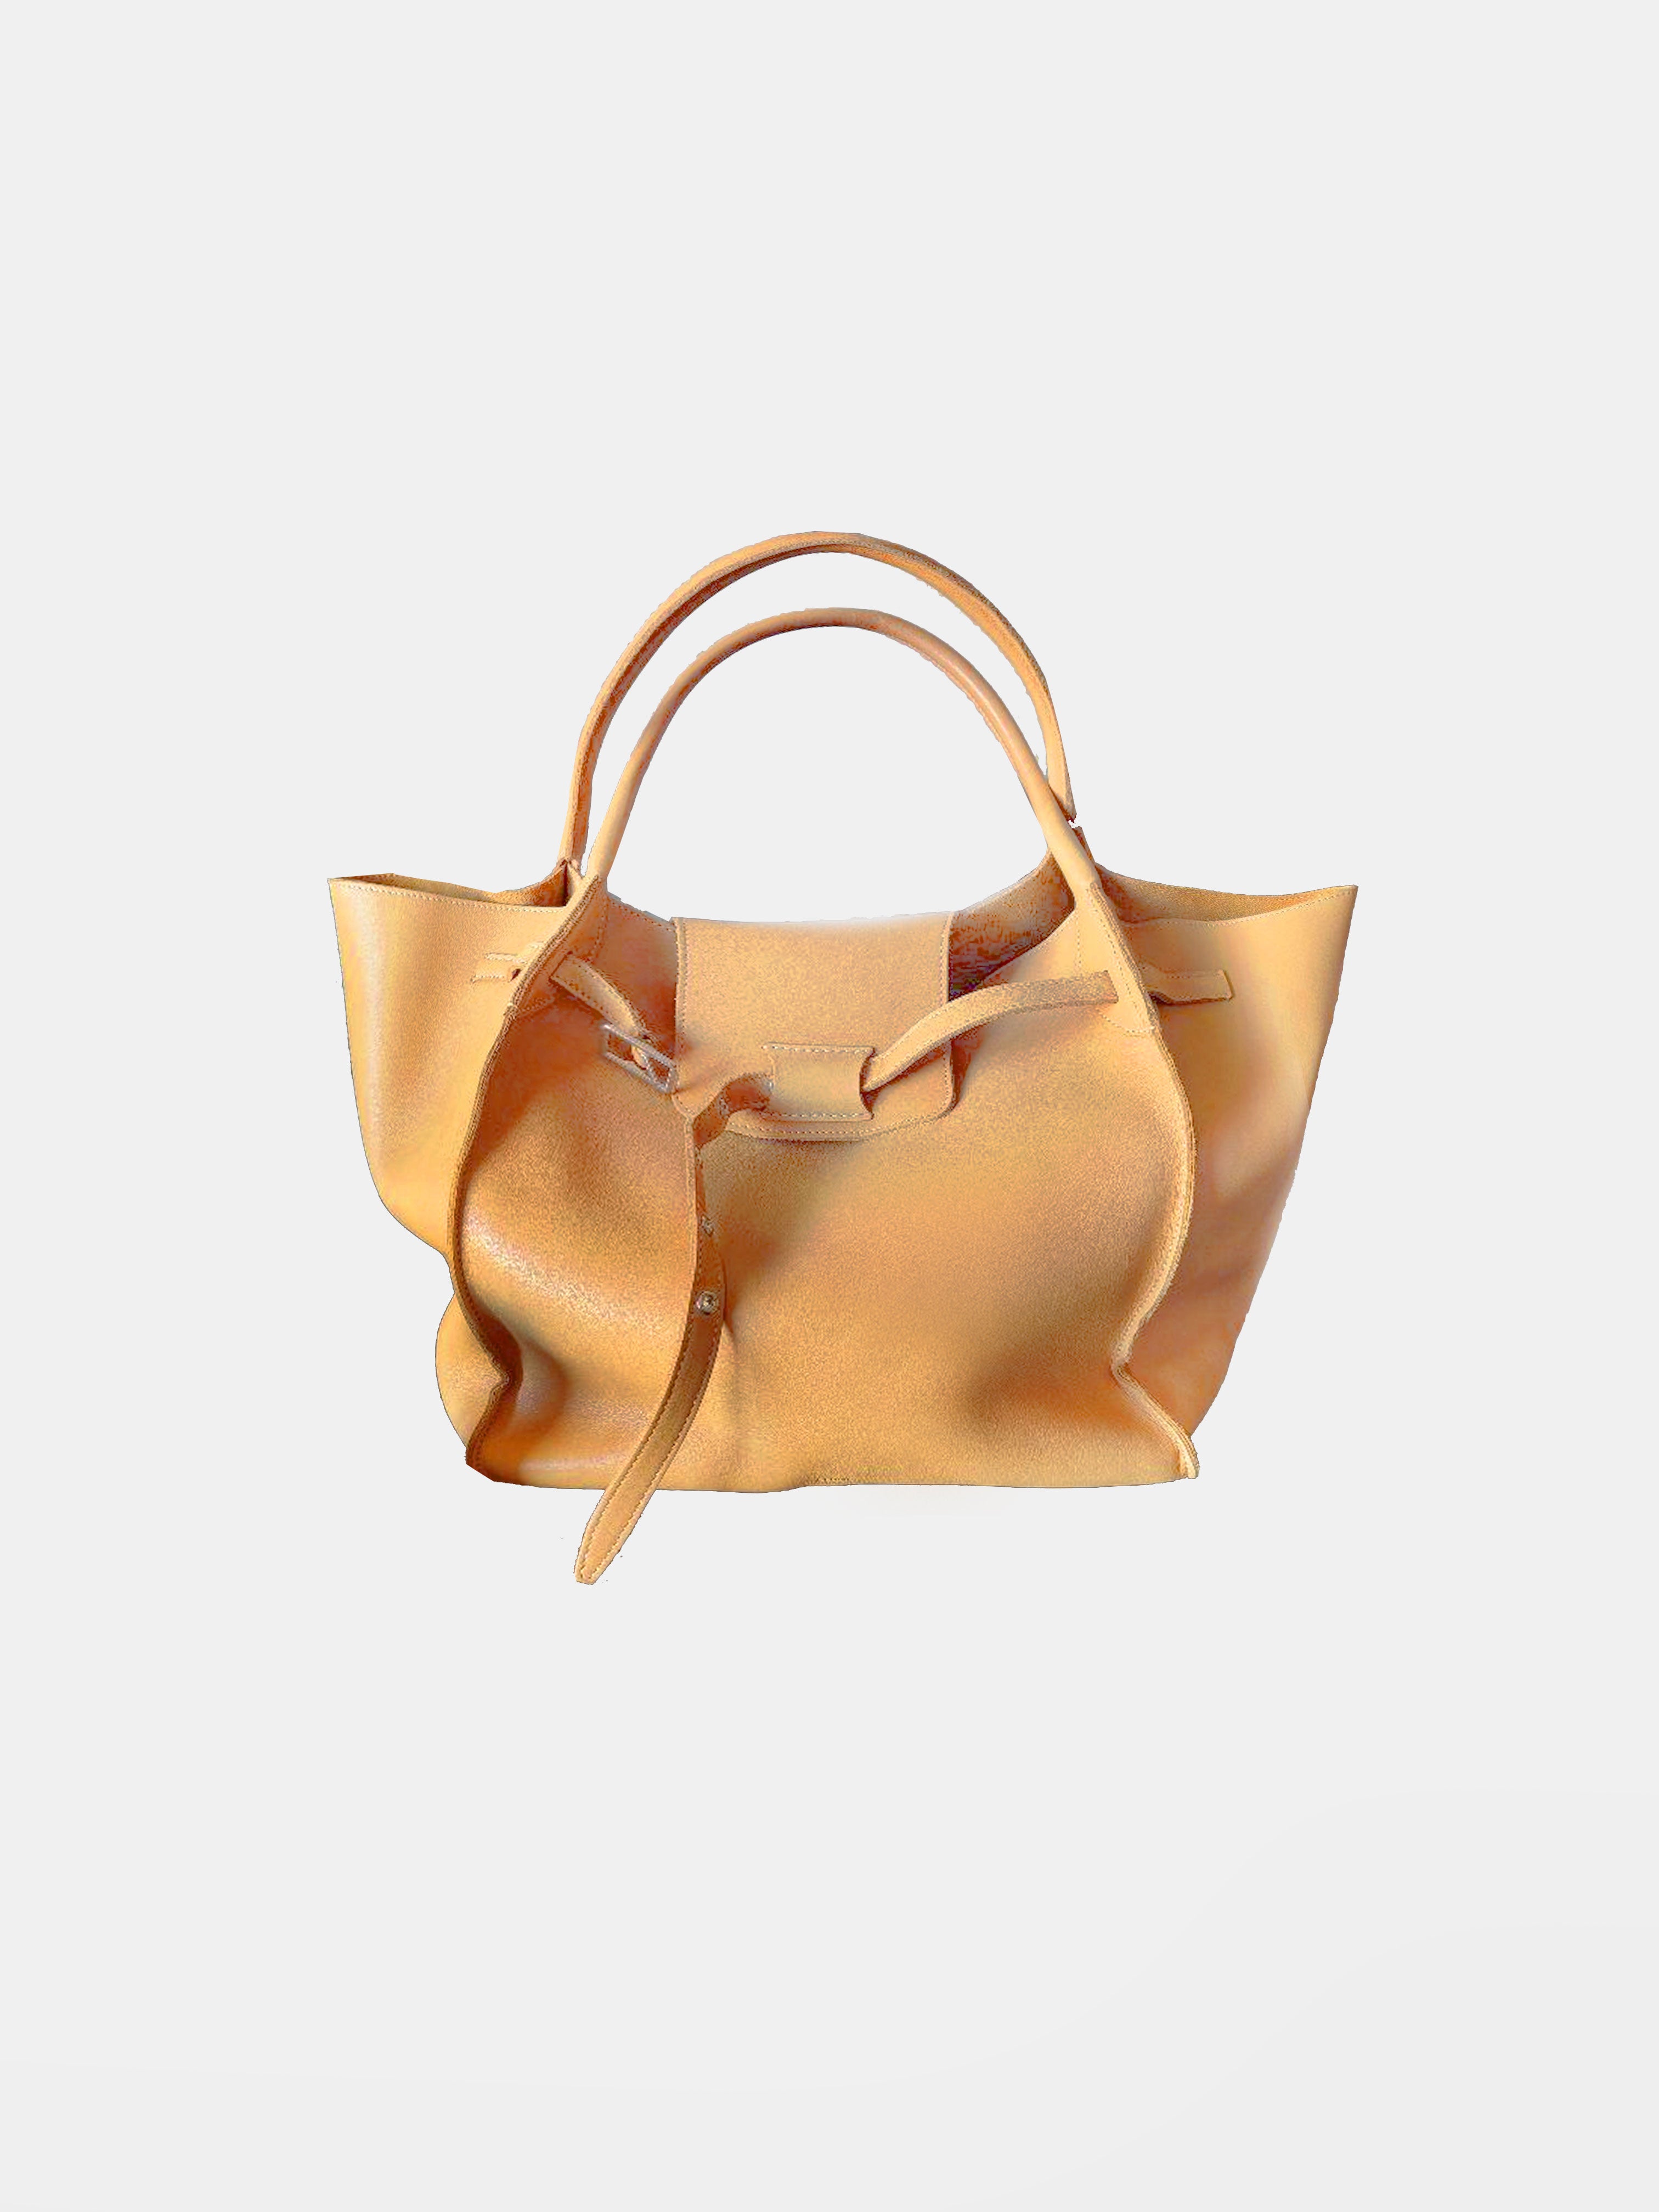 Celine by Phoebe Philo 2017 AW Beige Tote